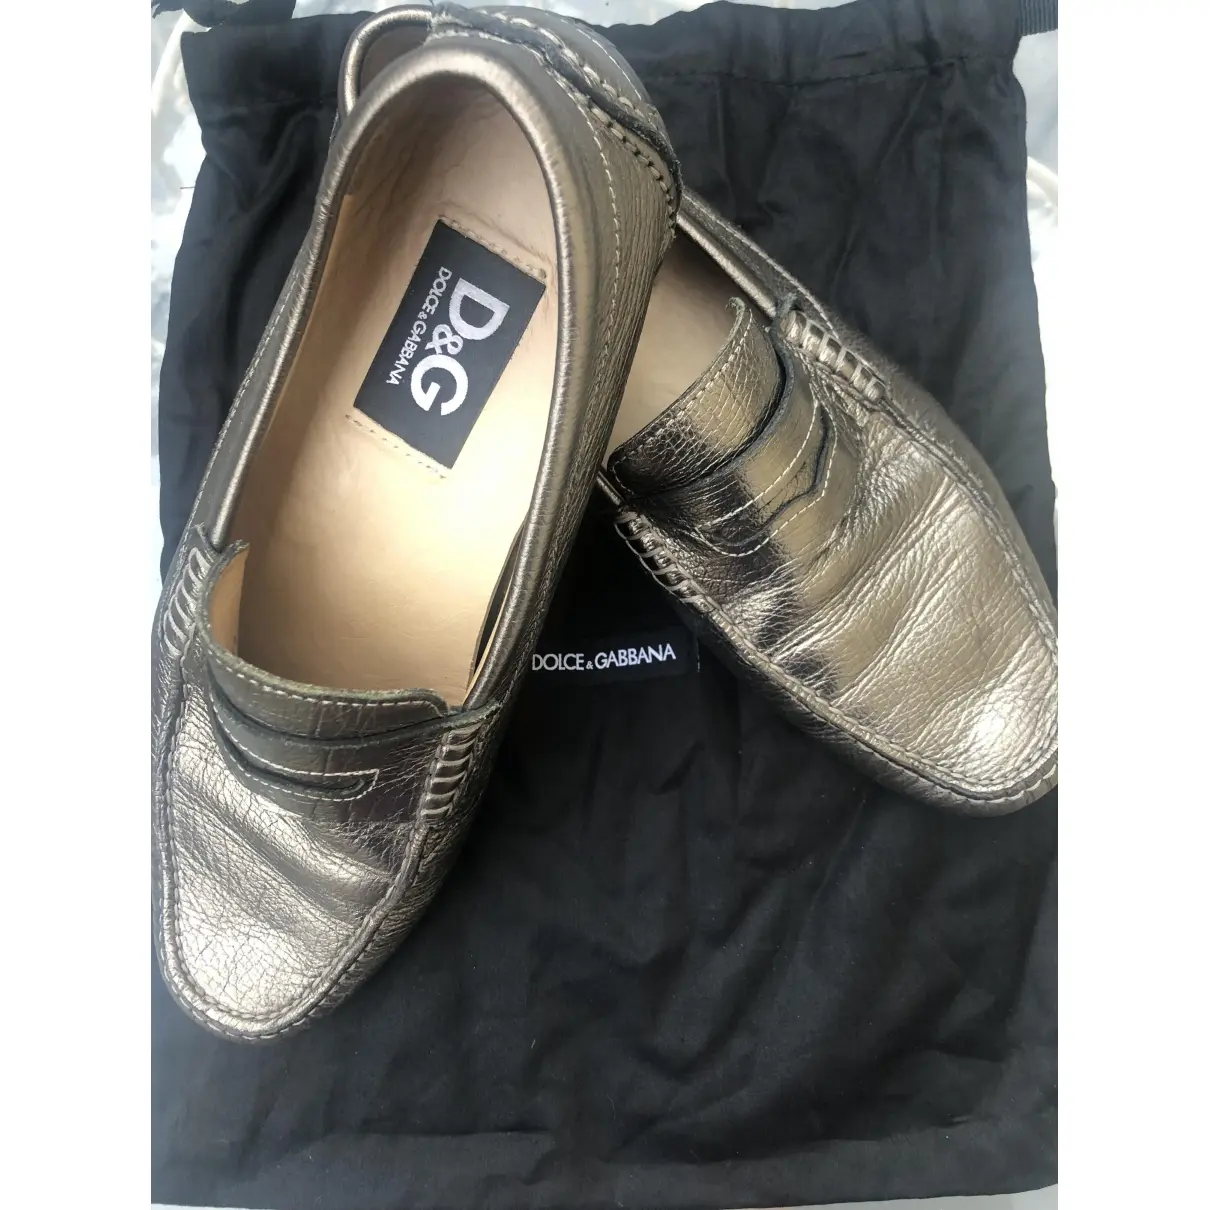 D&G Leather flats for sale